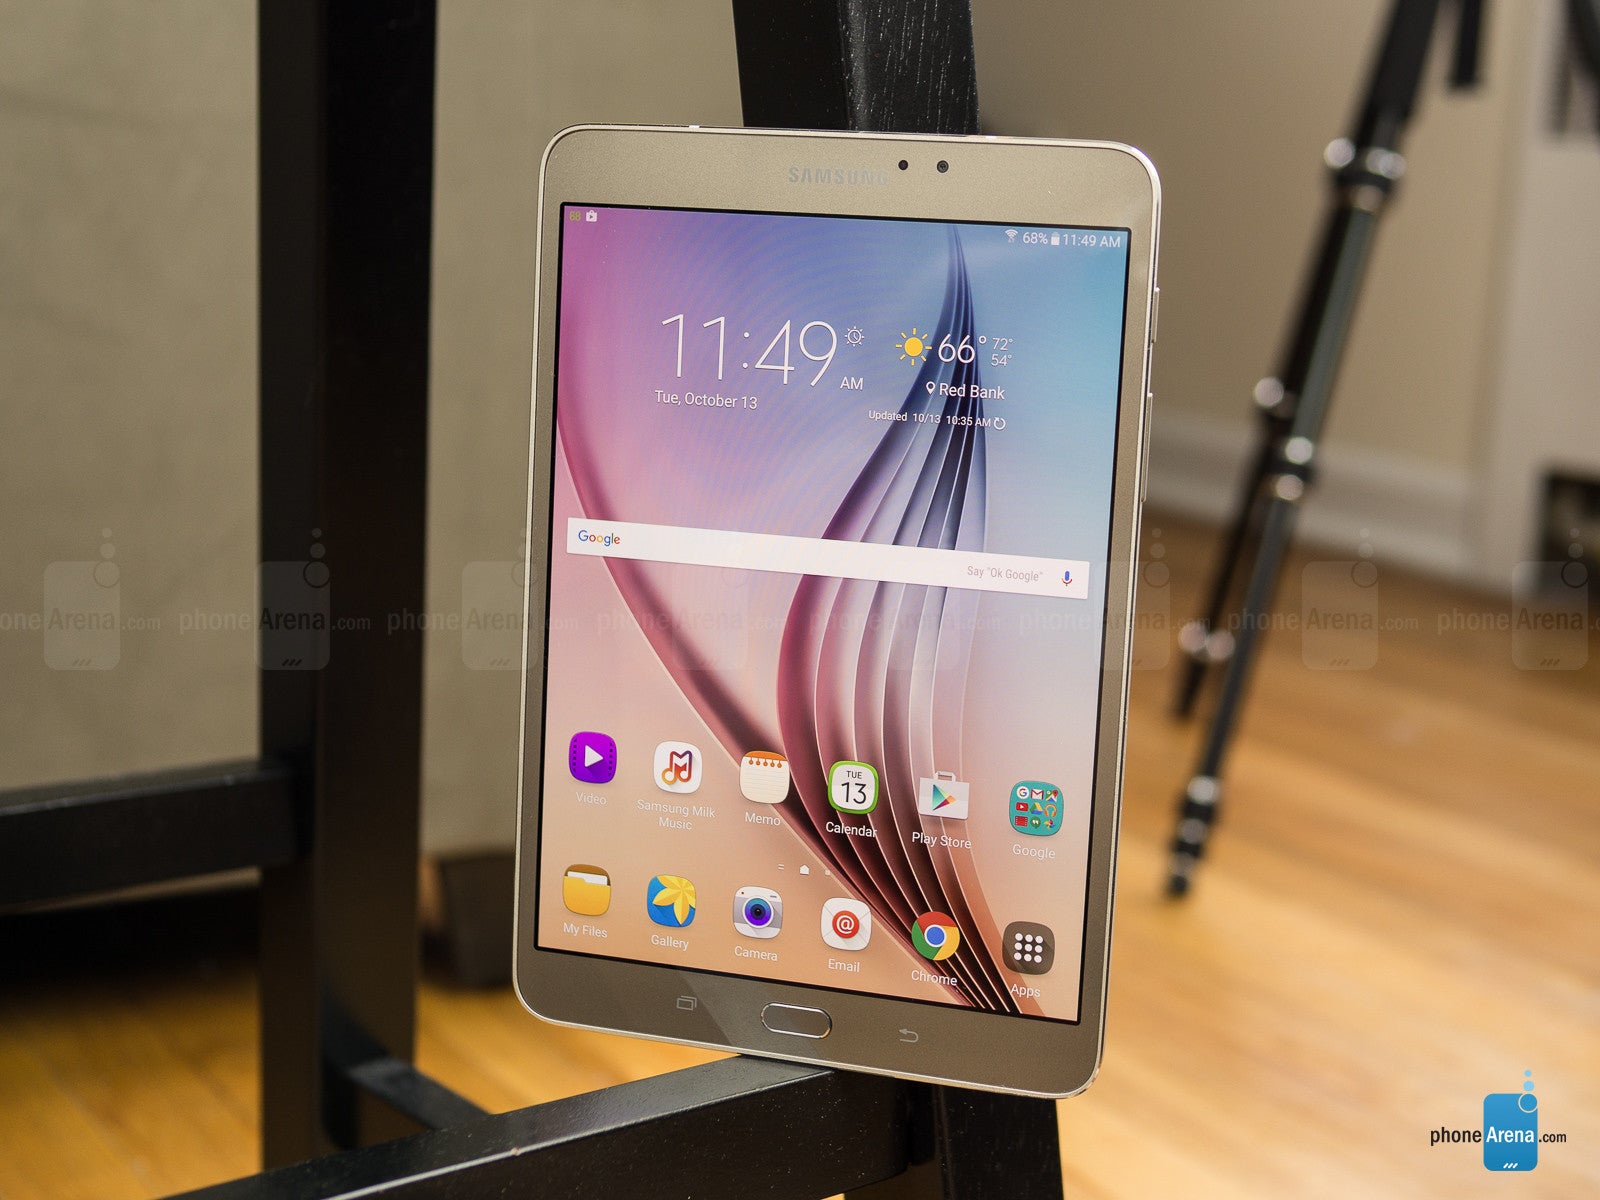 Grab a Galaxy Tab S2 8.0 straight from Samsung for just $249 right now, it's 37% off